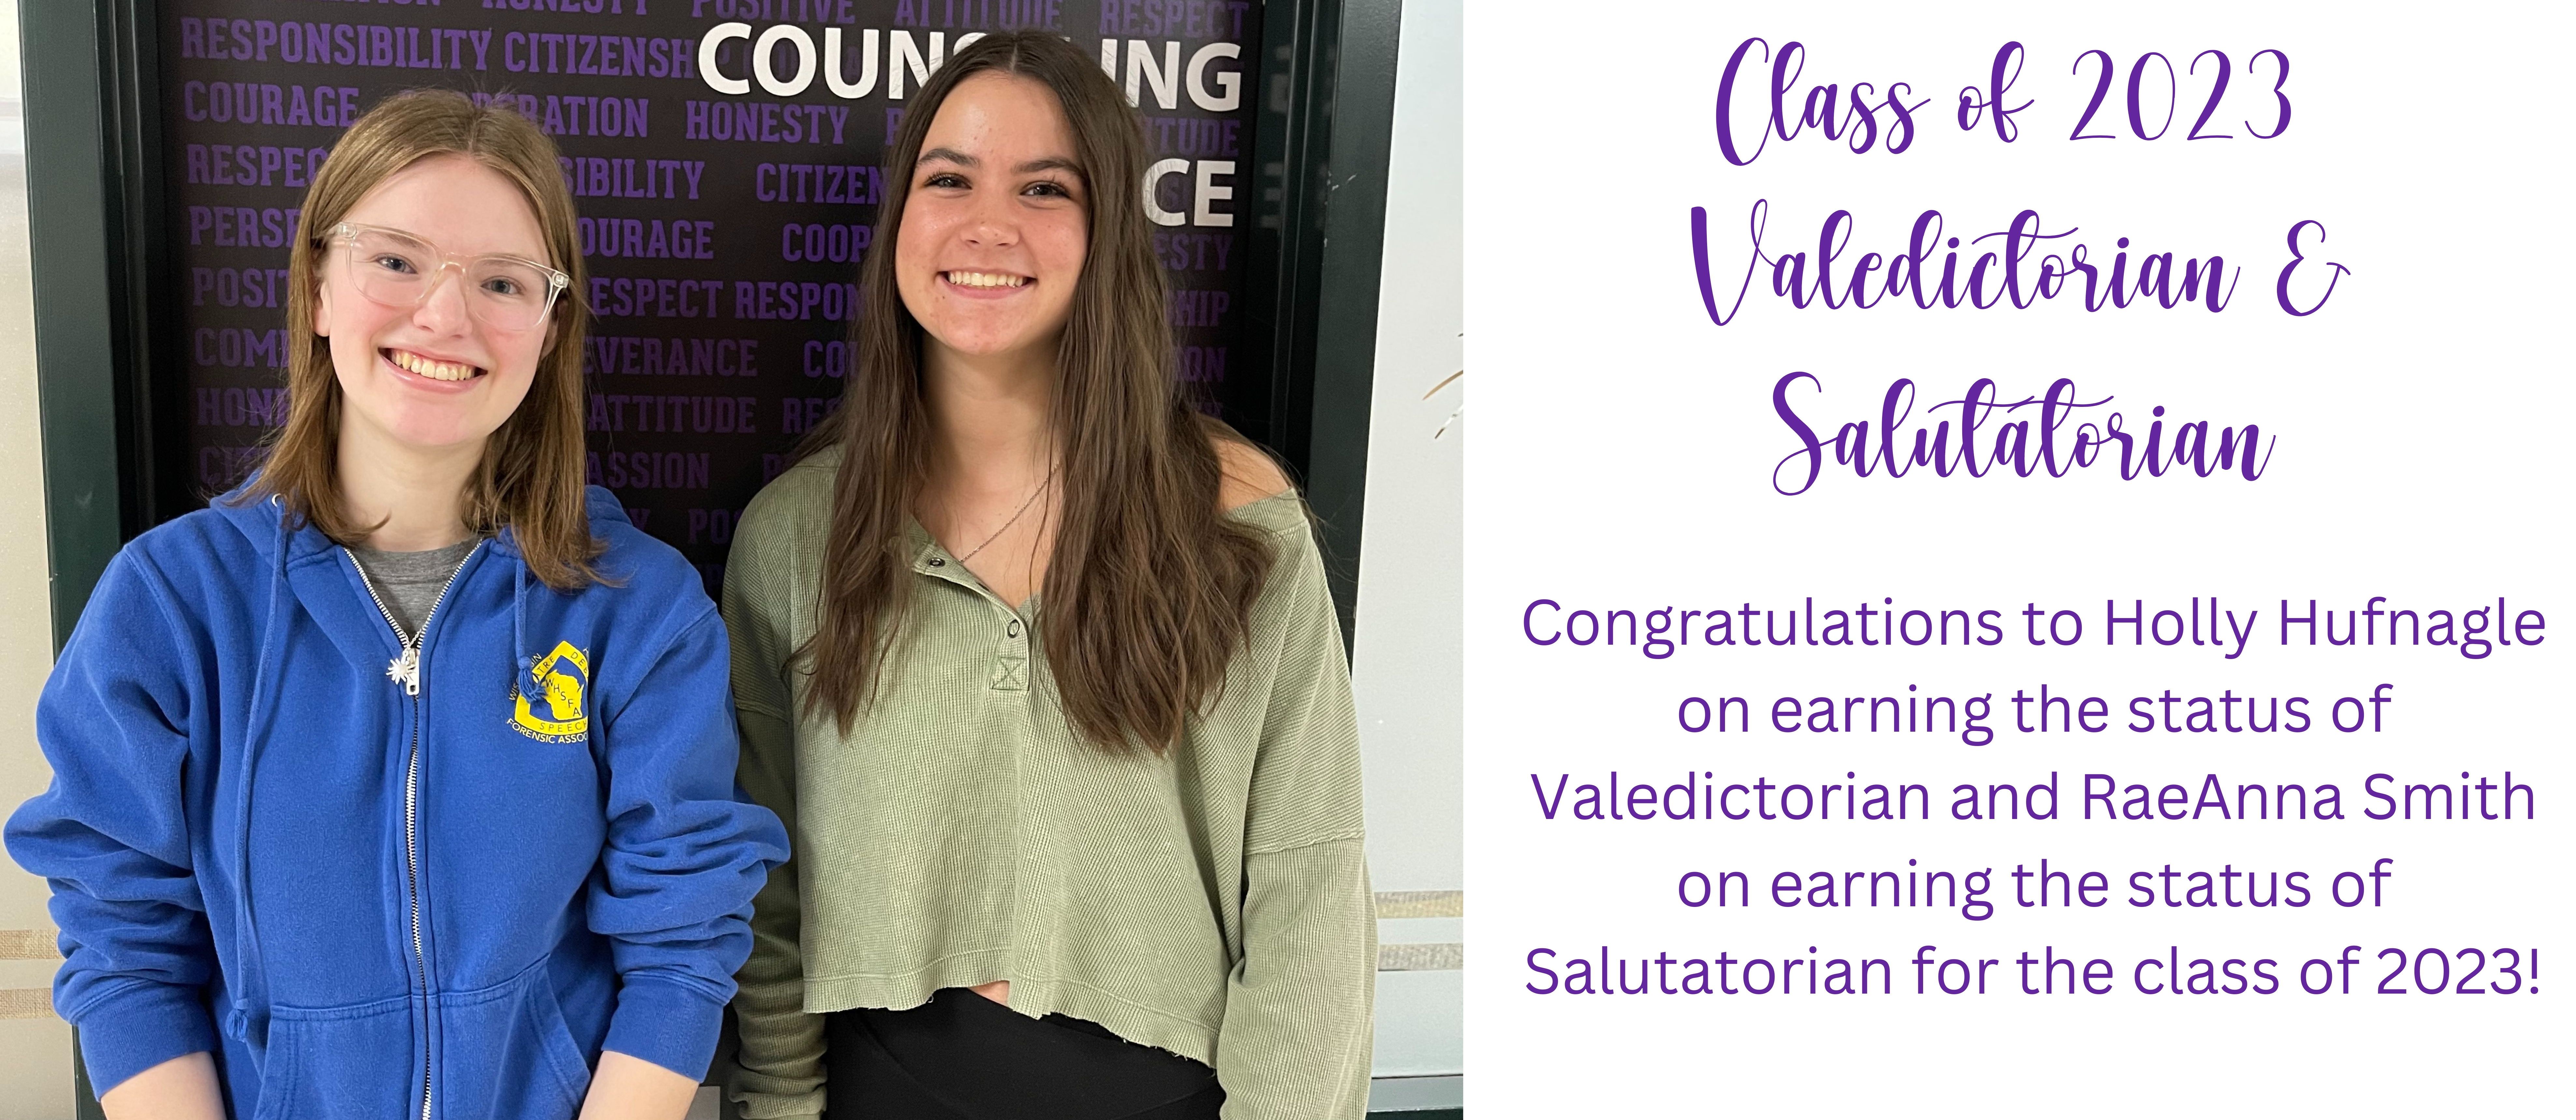 Congratulations to Holly Hufnagle on earning the status of Valedictorian and RaeAnna Smith on earning the status of Salutatorian for the class of 2023!